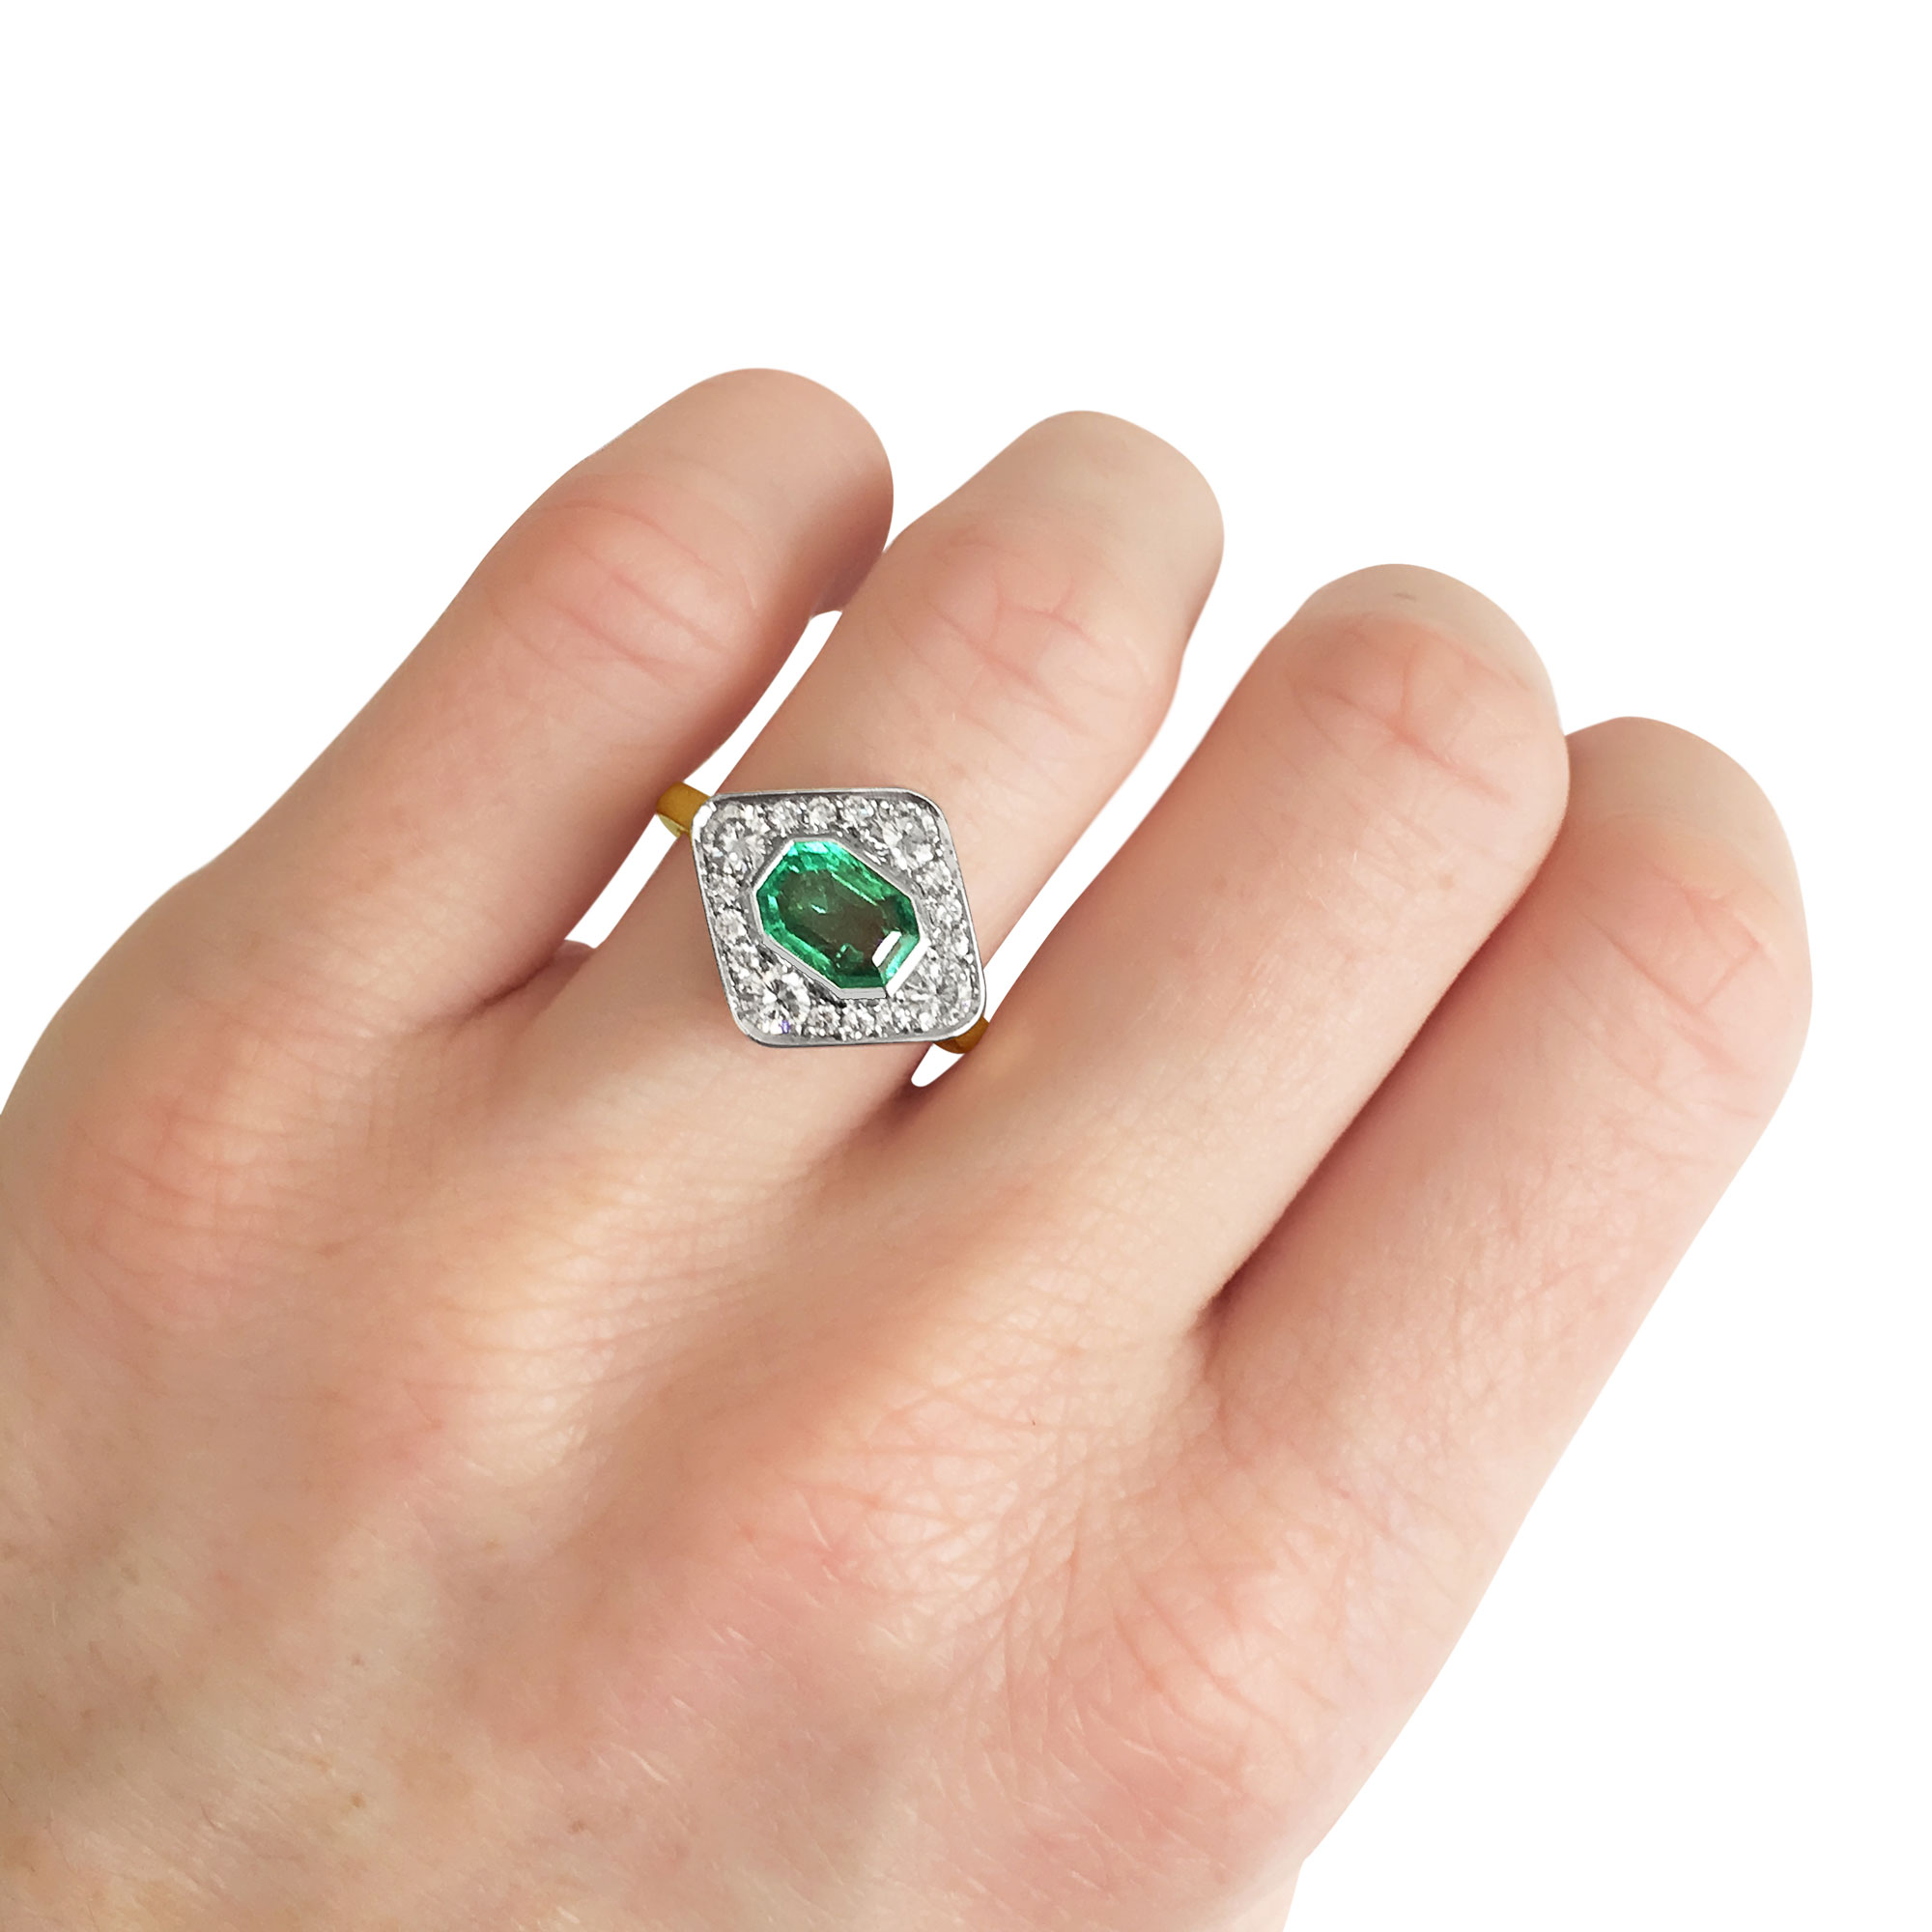 Emerald and diamond panel ring mounted in 18ct white and yellow gold on hand side